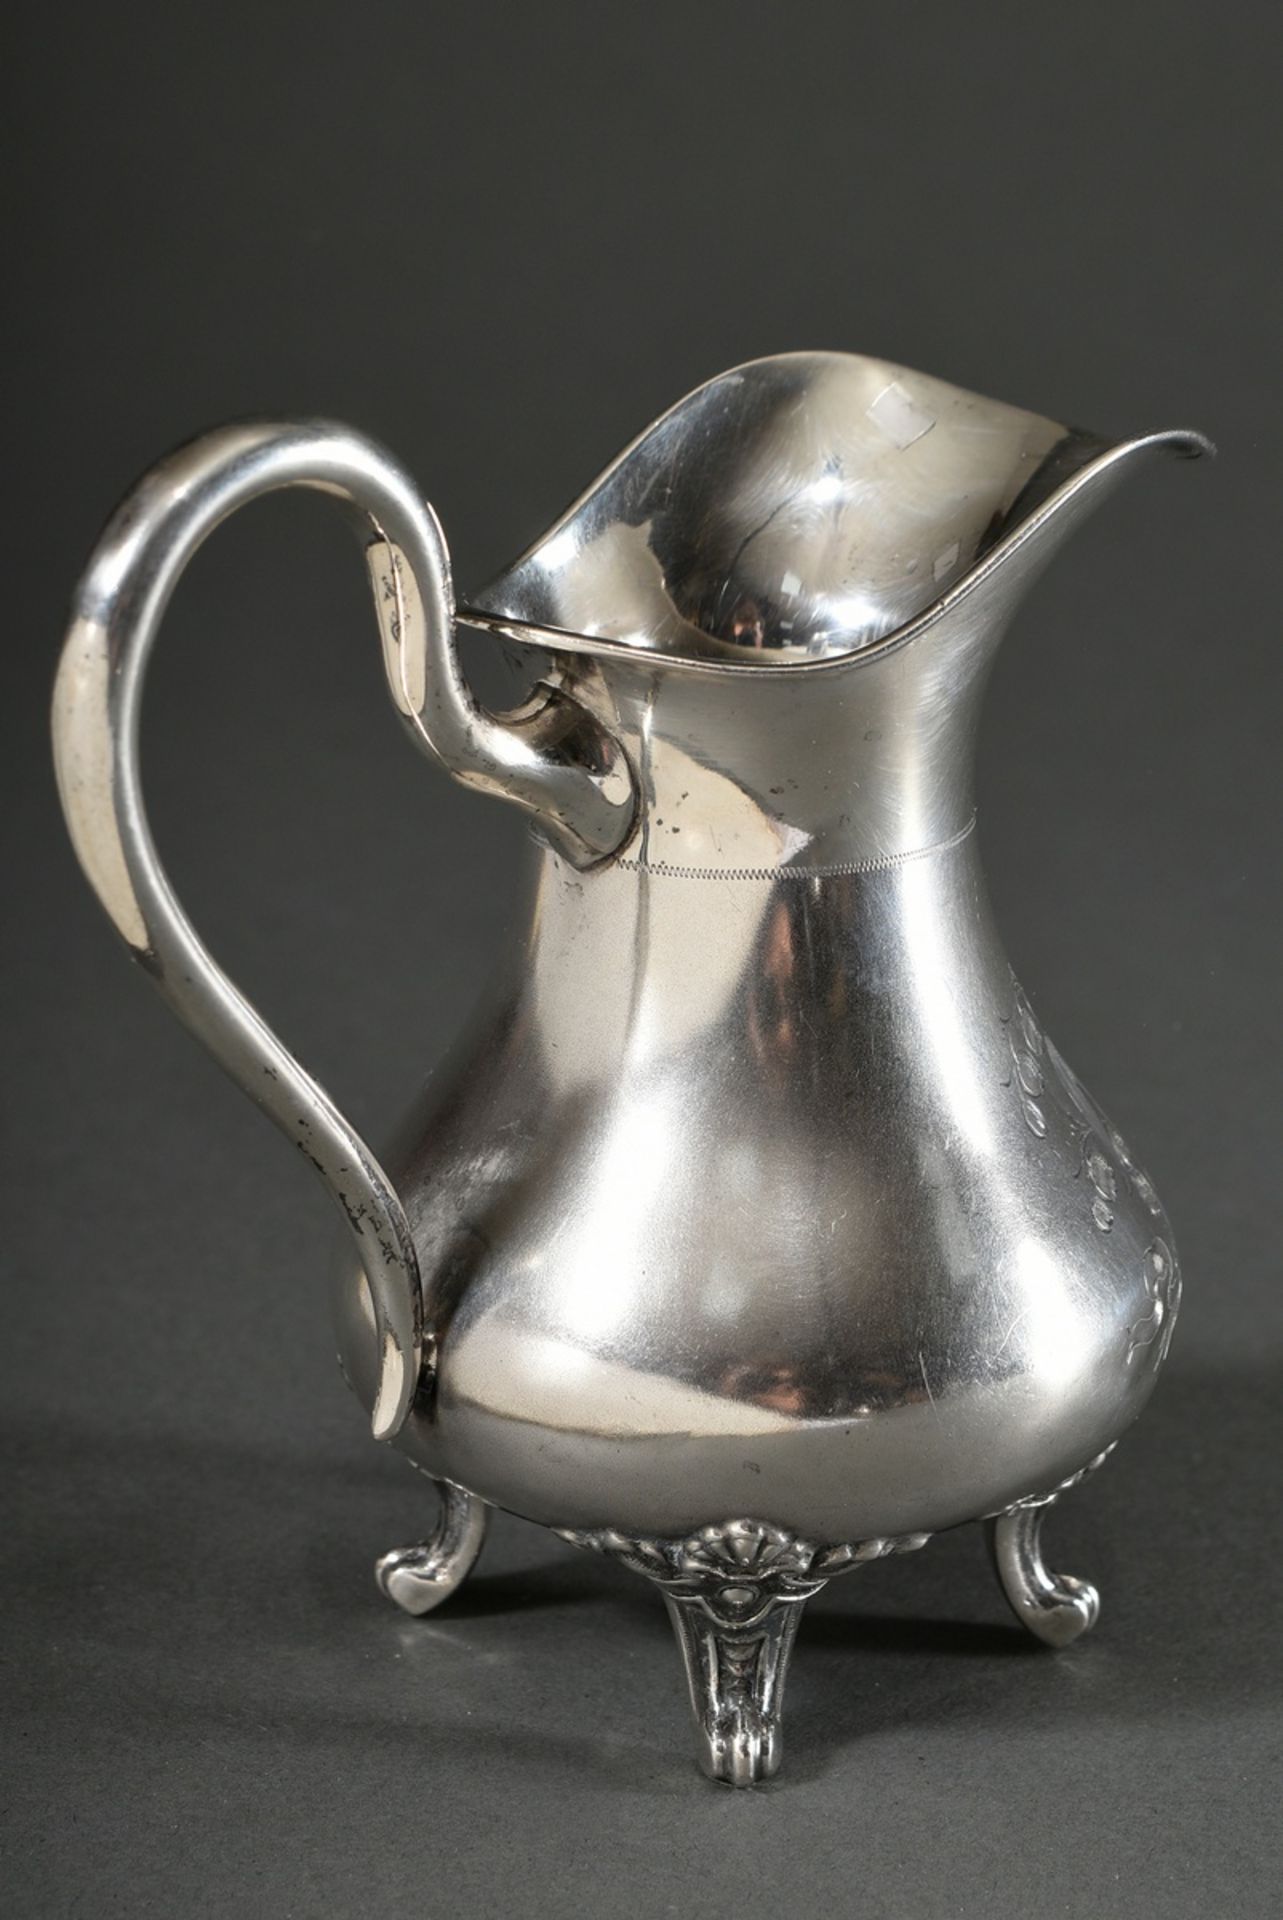 Cream jug with floral engraving "Lily of the Valley" on feet, c. 1890, Manufact. Emil Hofmann/Hambu - Image 2 of 5